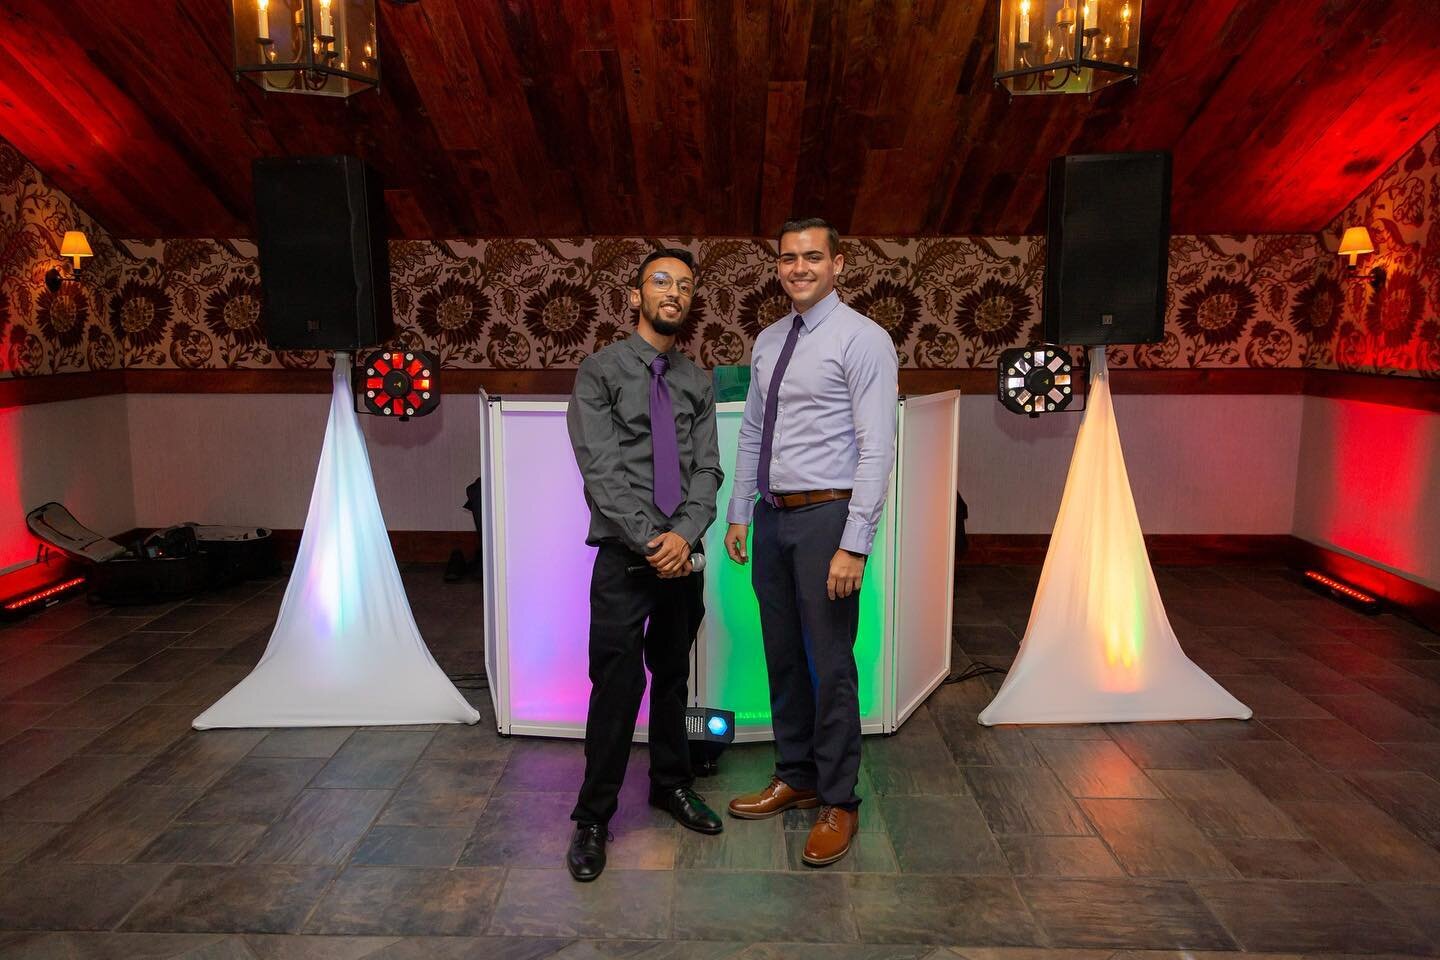 💥@djdannyslim &amp; @djfreyer &hellip;The dynamic duo of beats &amp; rhythms💥
&bull;
✨We will Bring your event to life with our top-notch DJ services! From the latest hits to the classic jams, we will keep your guests dancing all night long!!✨
&bul